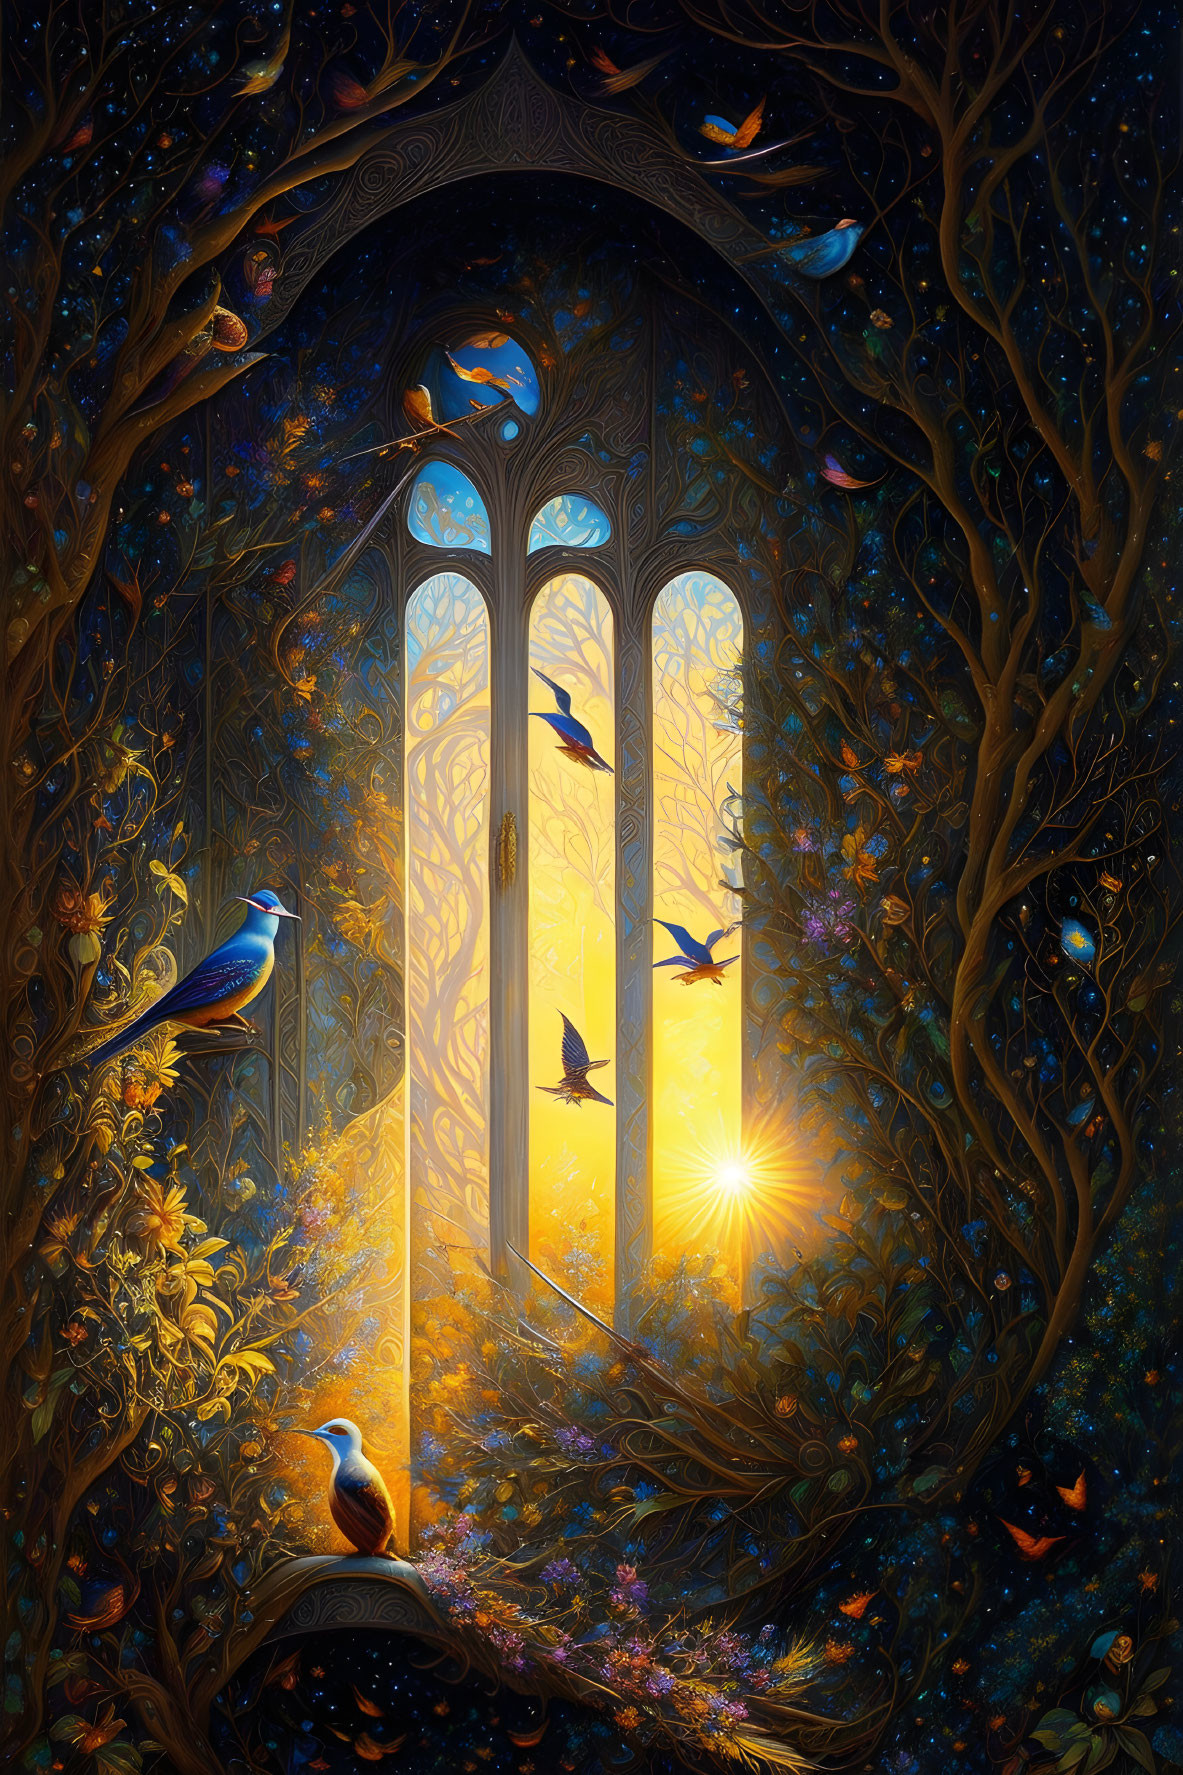 Mystical forest and gothic window scene with sunset and birds